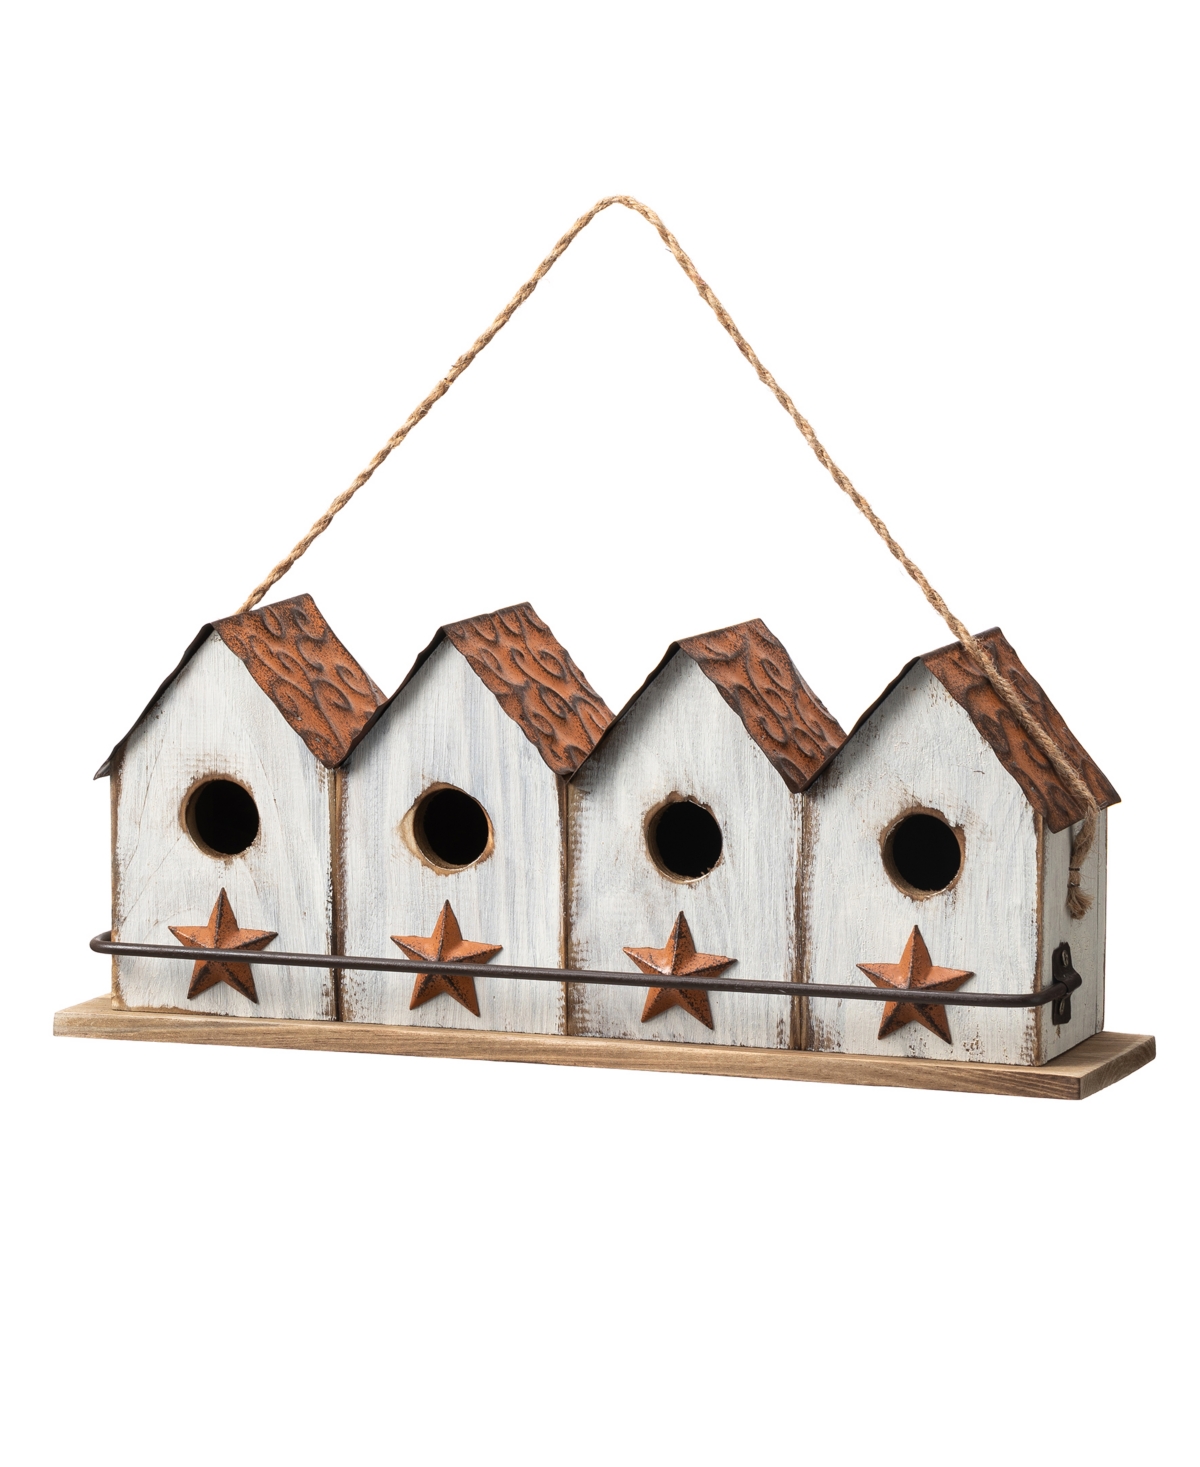 17" L Washed White Distressed Solid Wood 4-Room Villa Garden Birdhouse with Perch - Multi